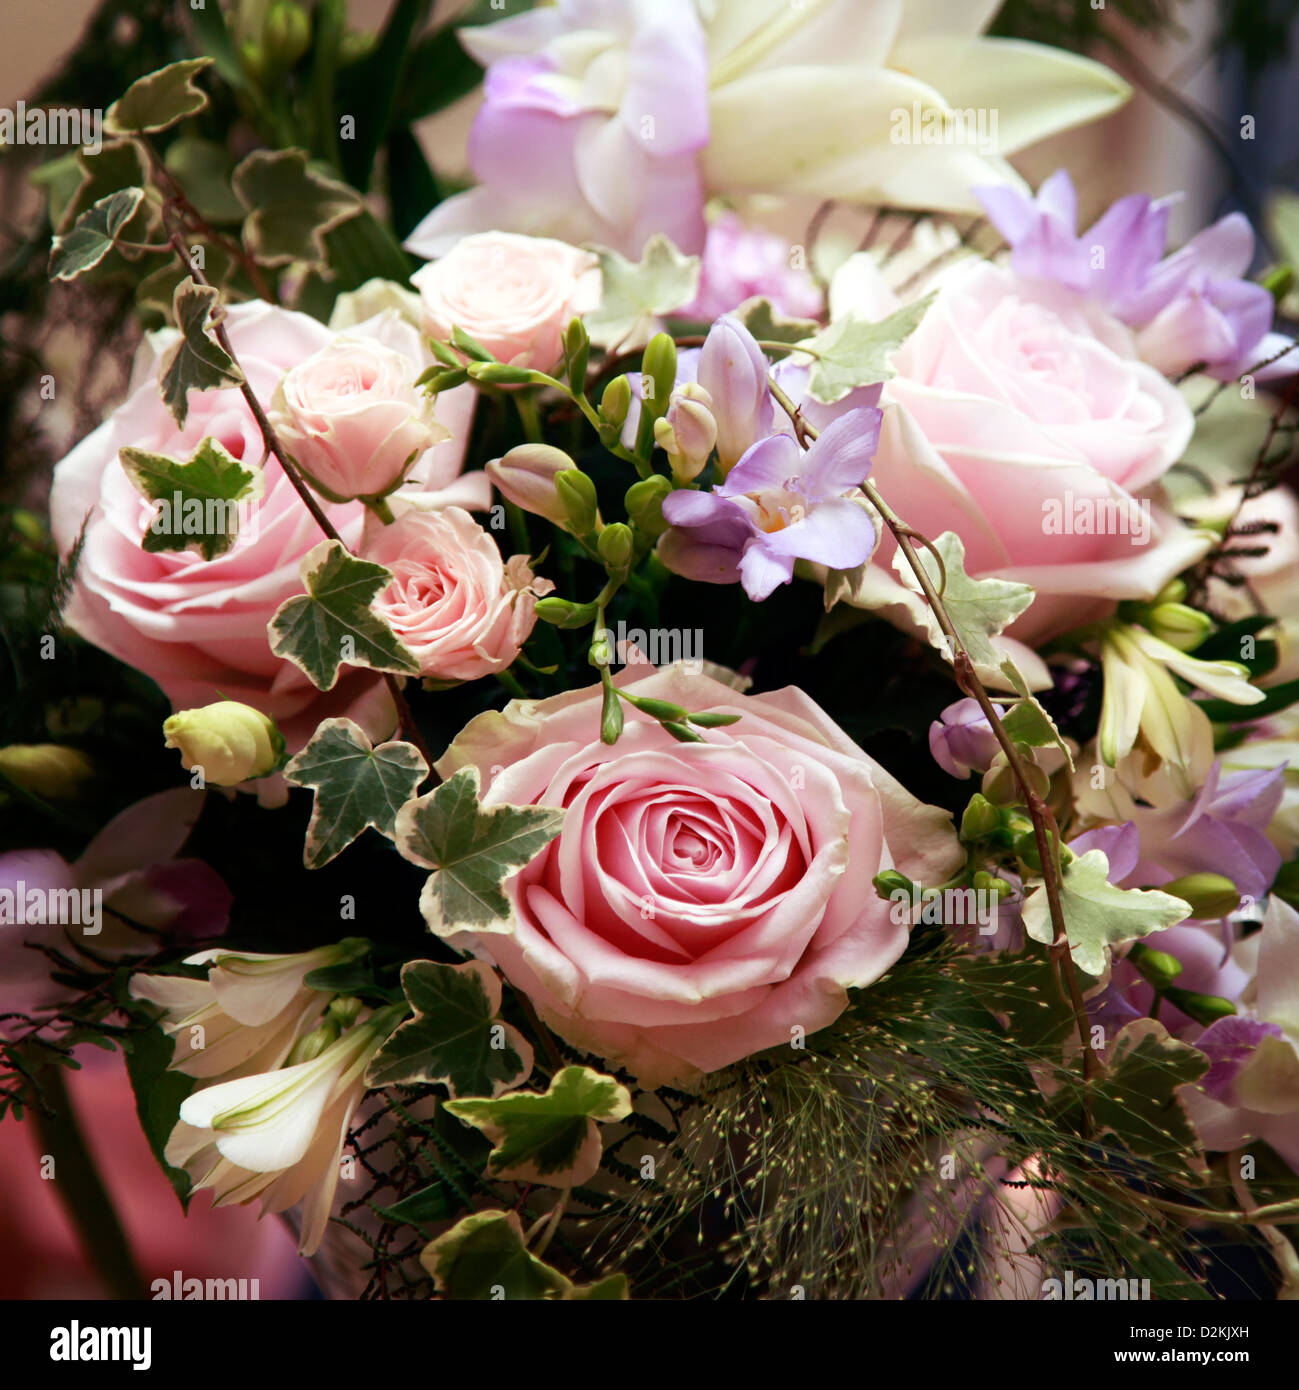 Bouquet from roses and other flowers Stock Photo - Alamy